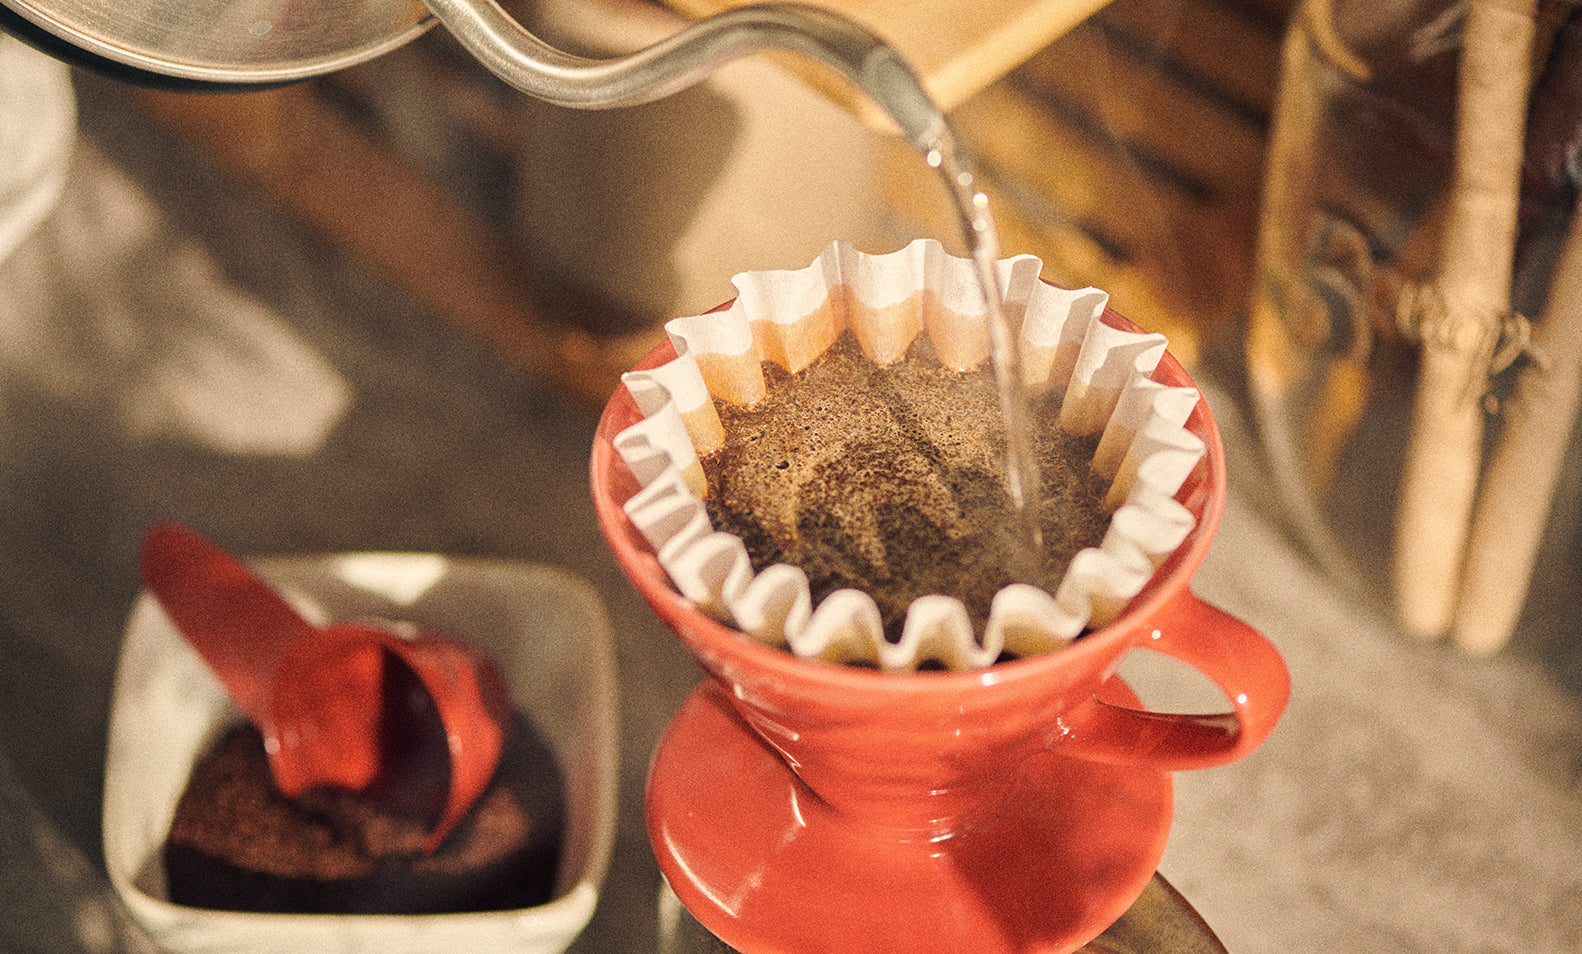 How to brew with Hario V60